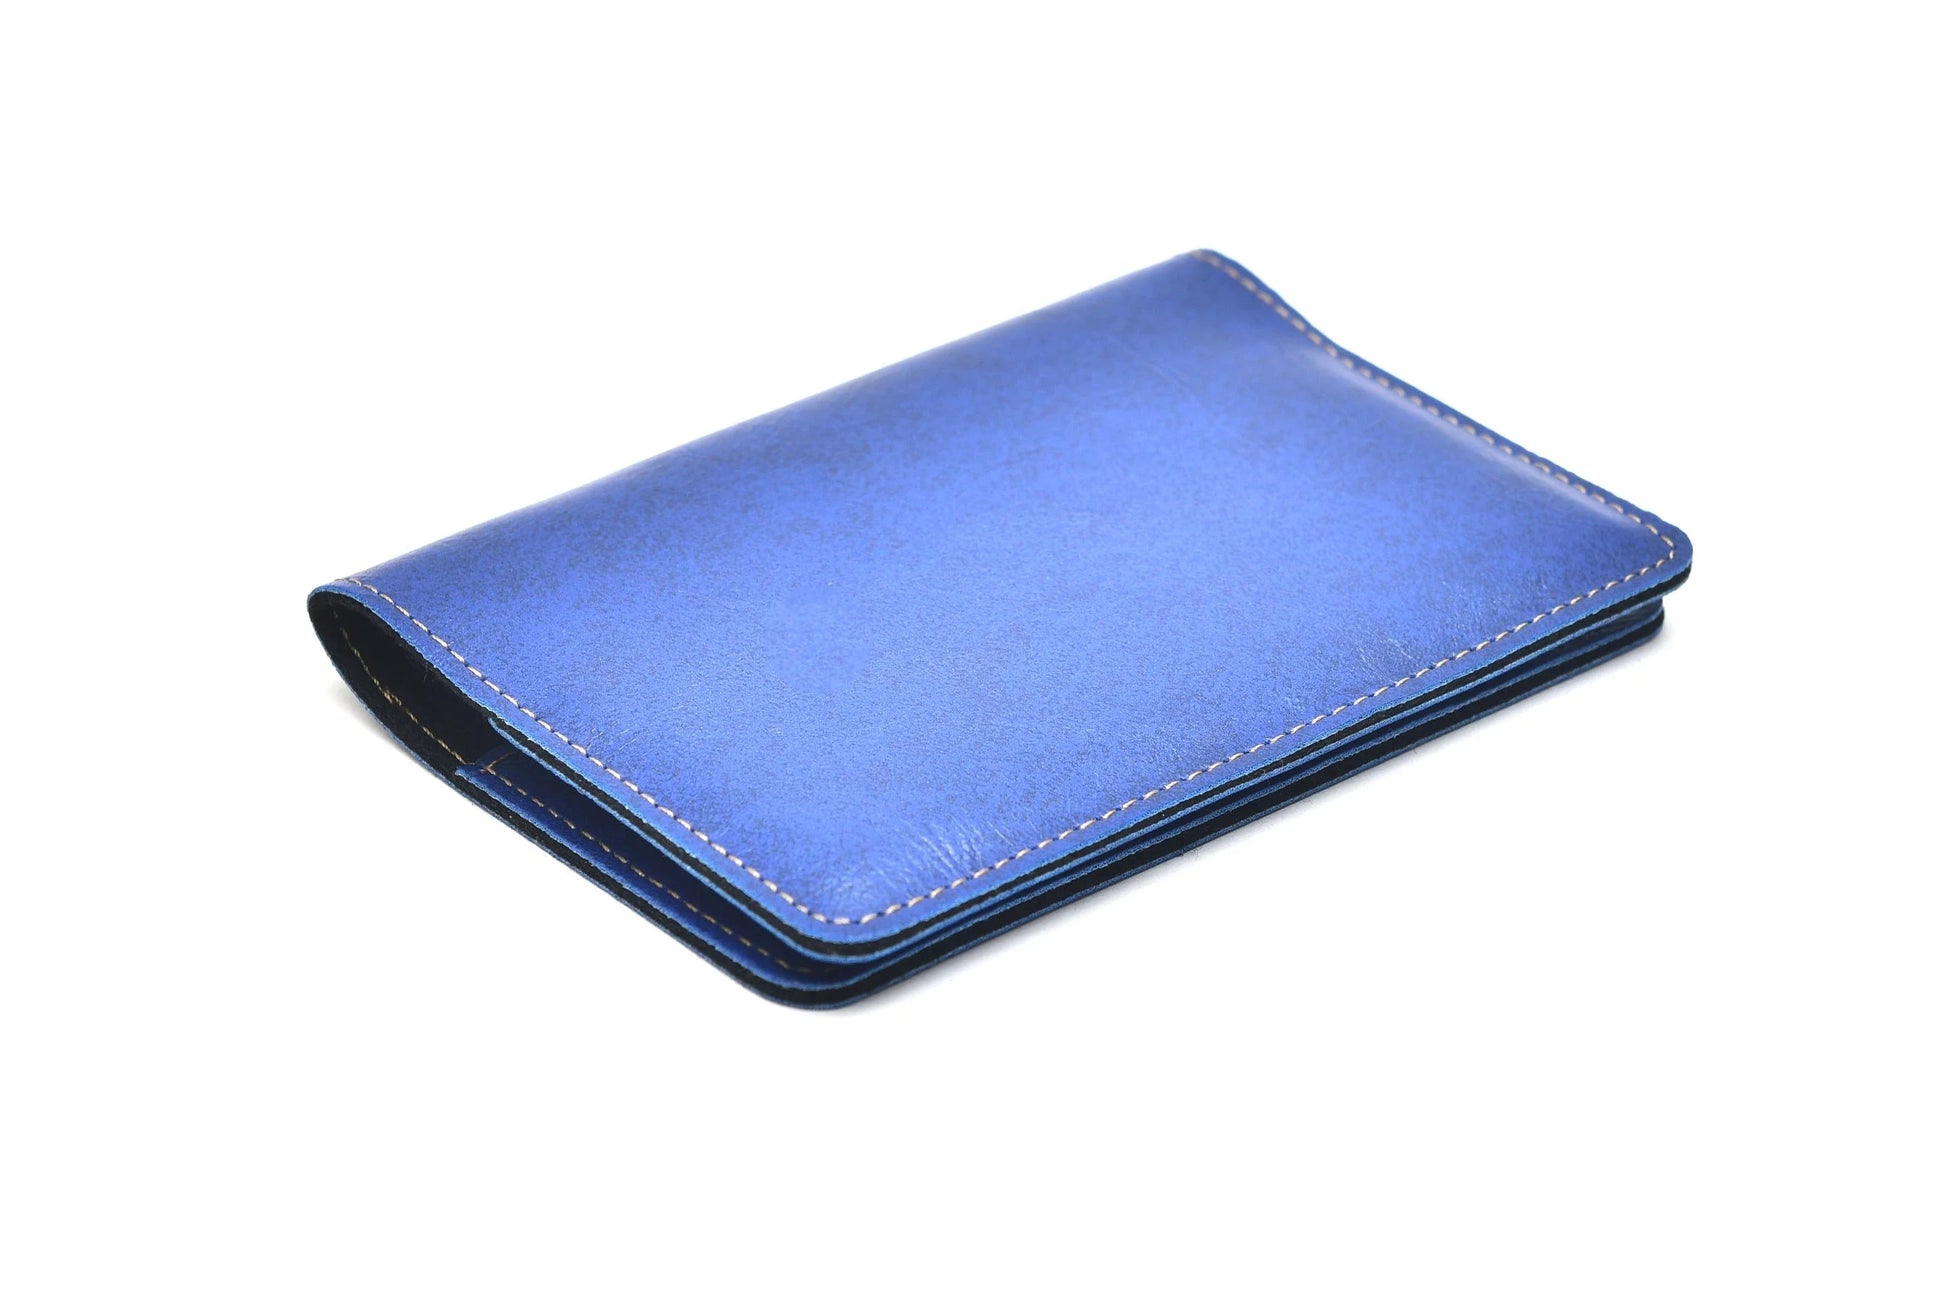 Upgrade your travel essentials with a personalized leather passport case that is as classy as it is practical.